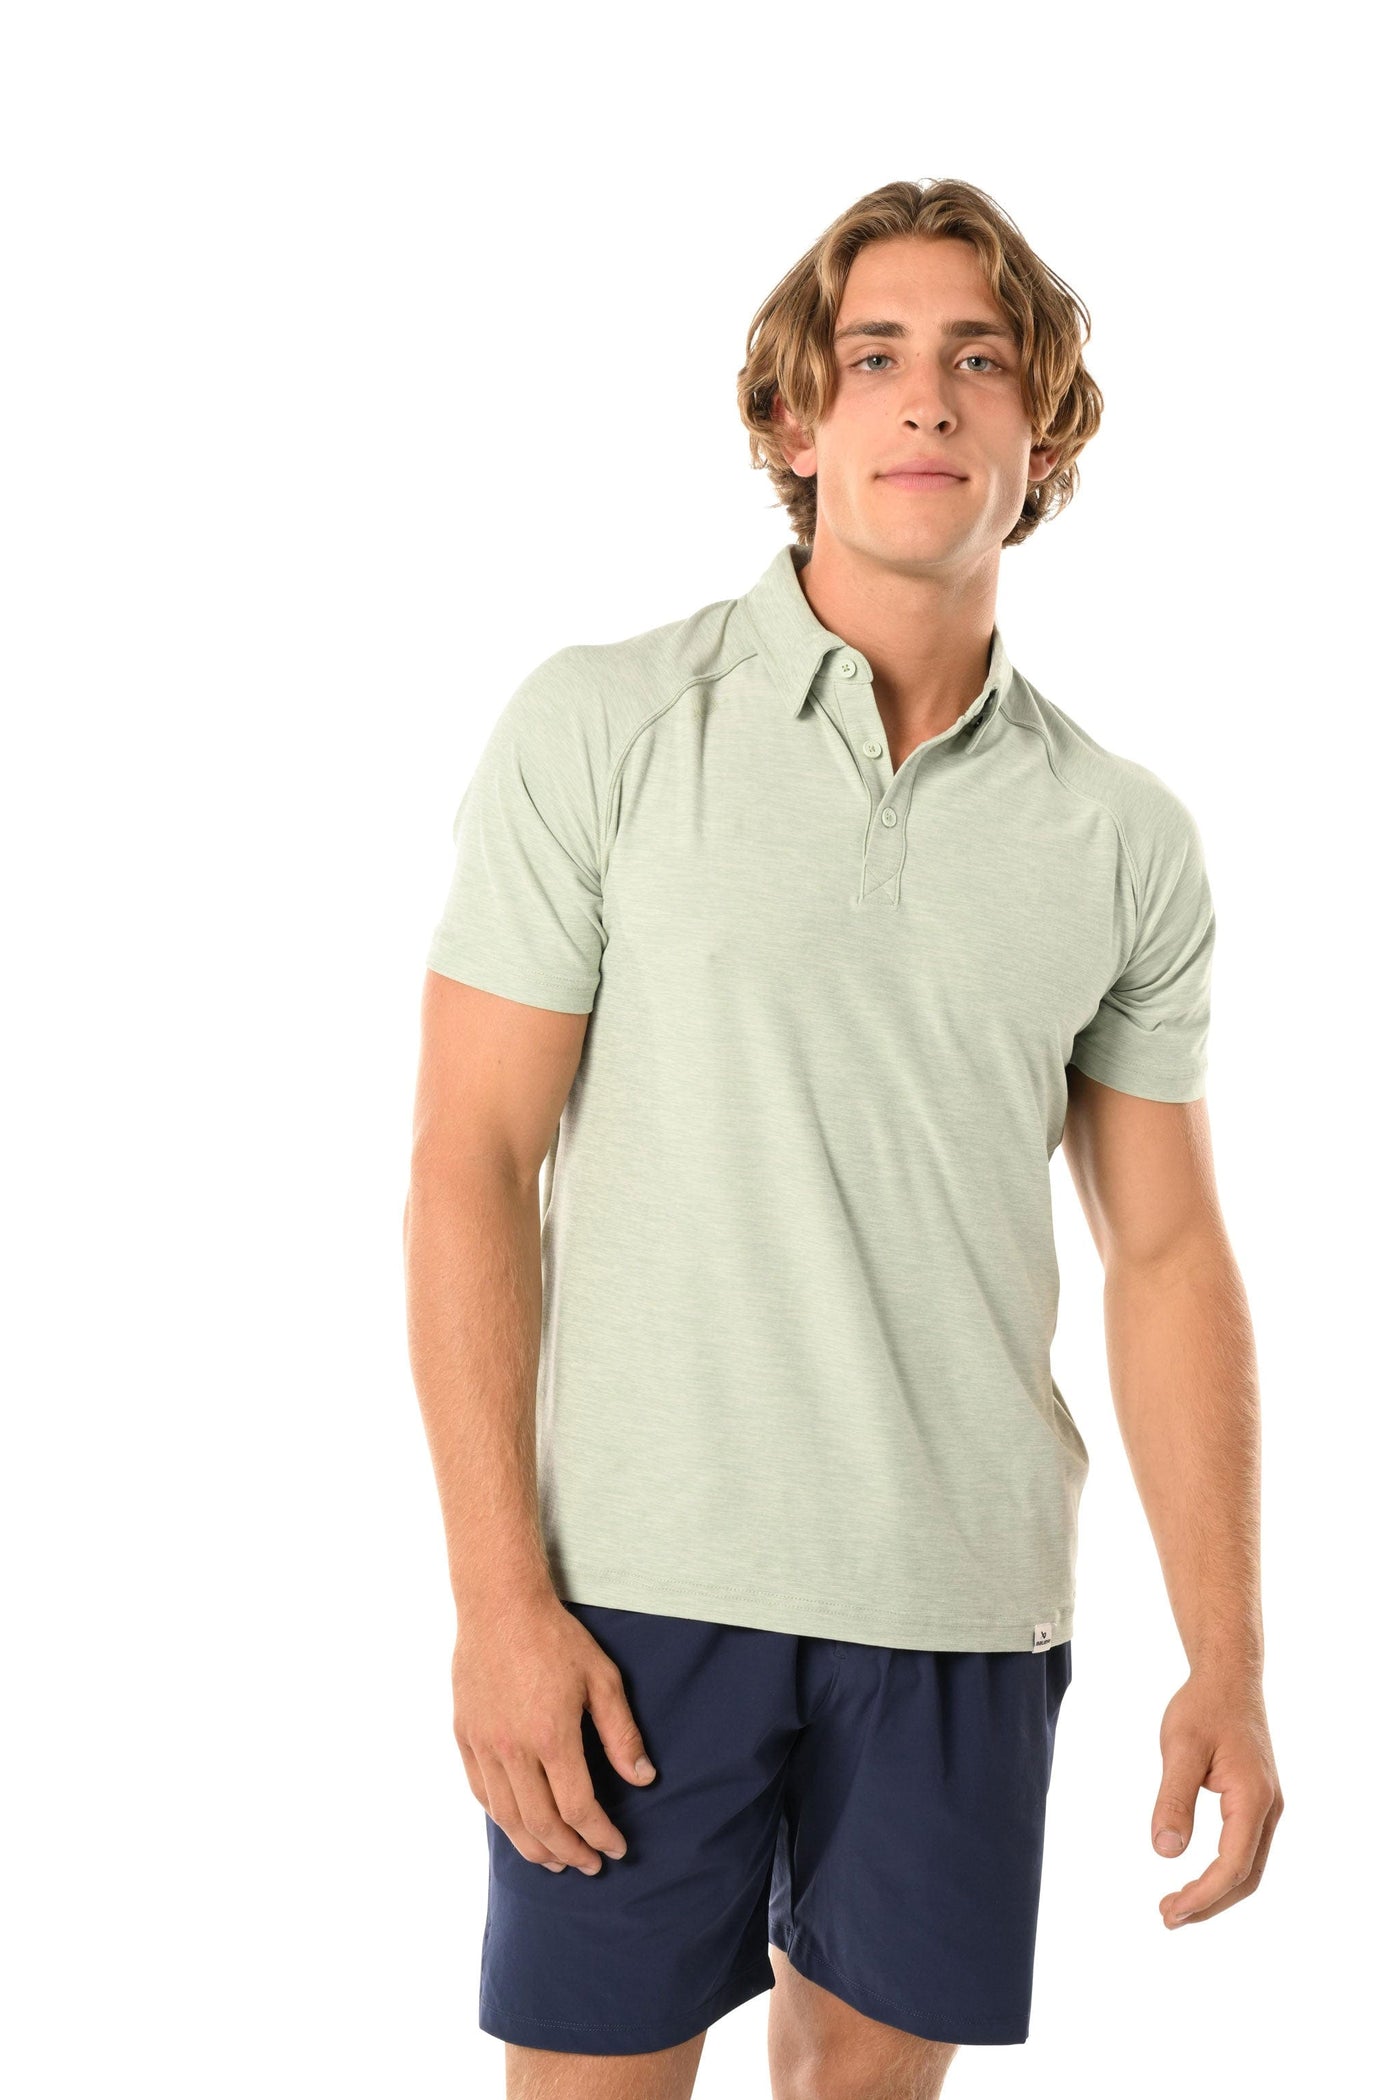 Bauer FLC Performance Mens Polo - Mint - The Hockey Shop Source For Sports